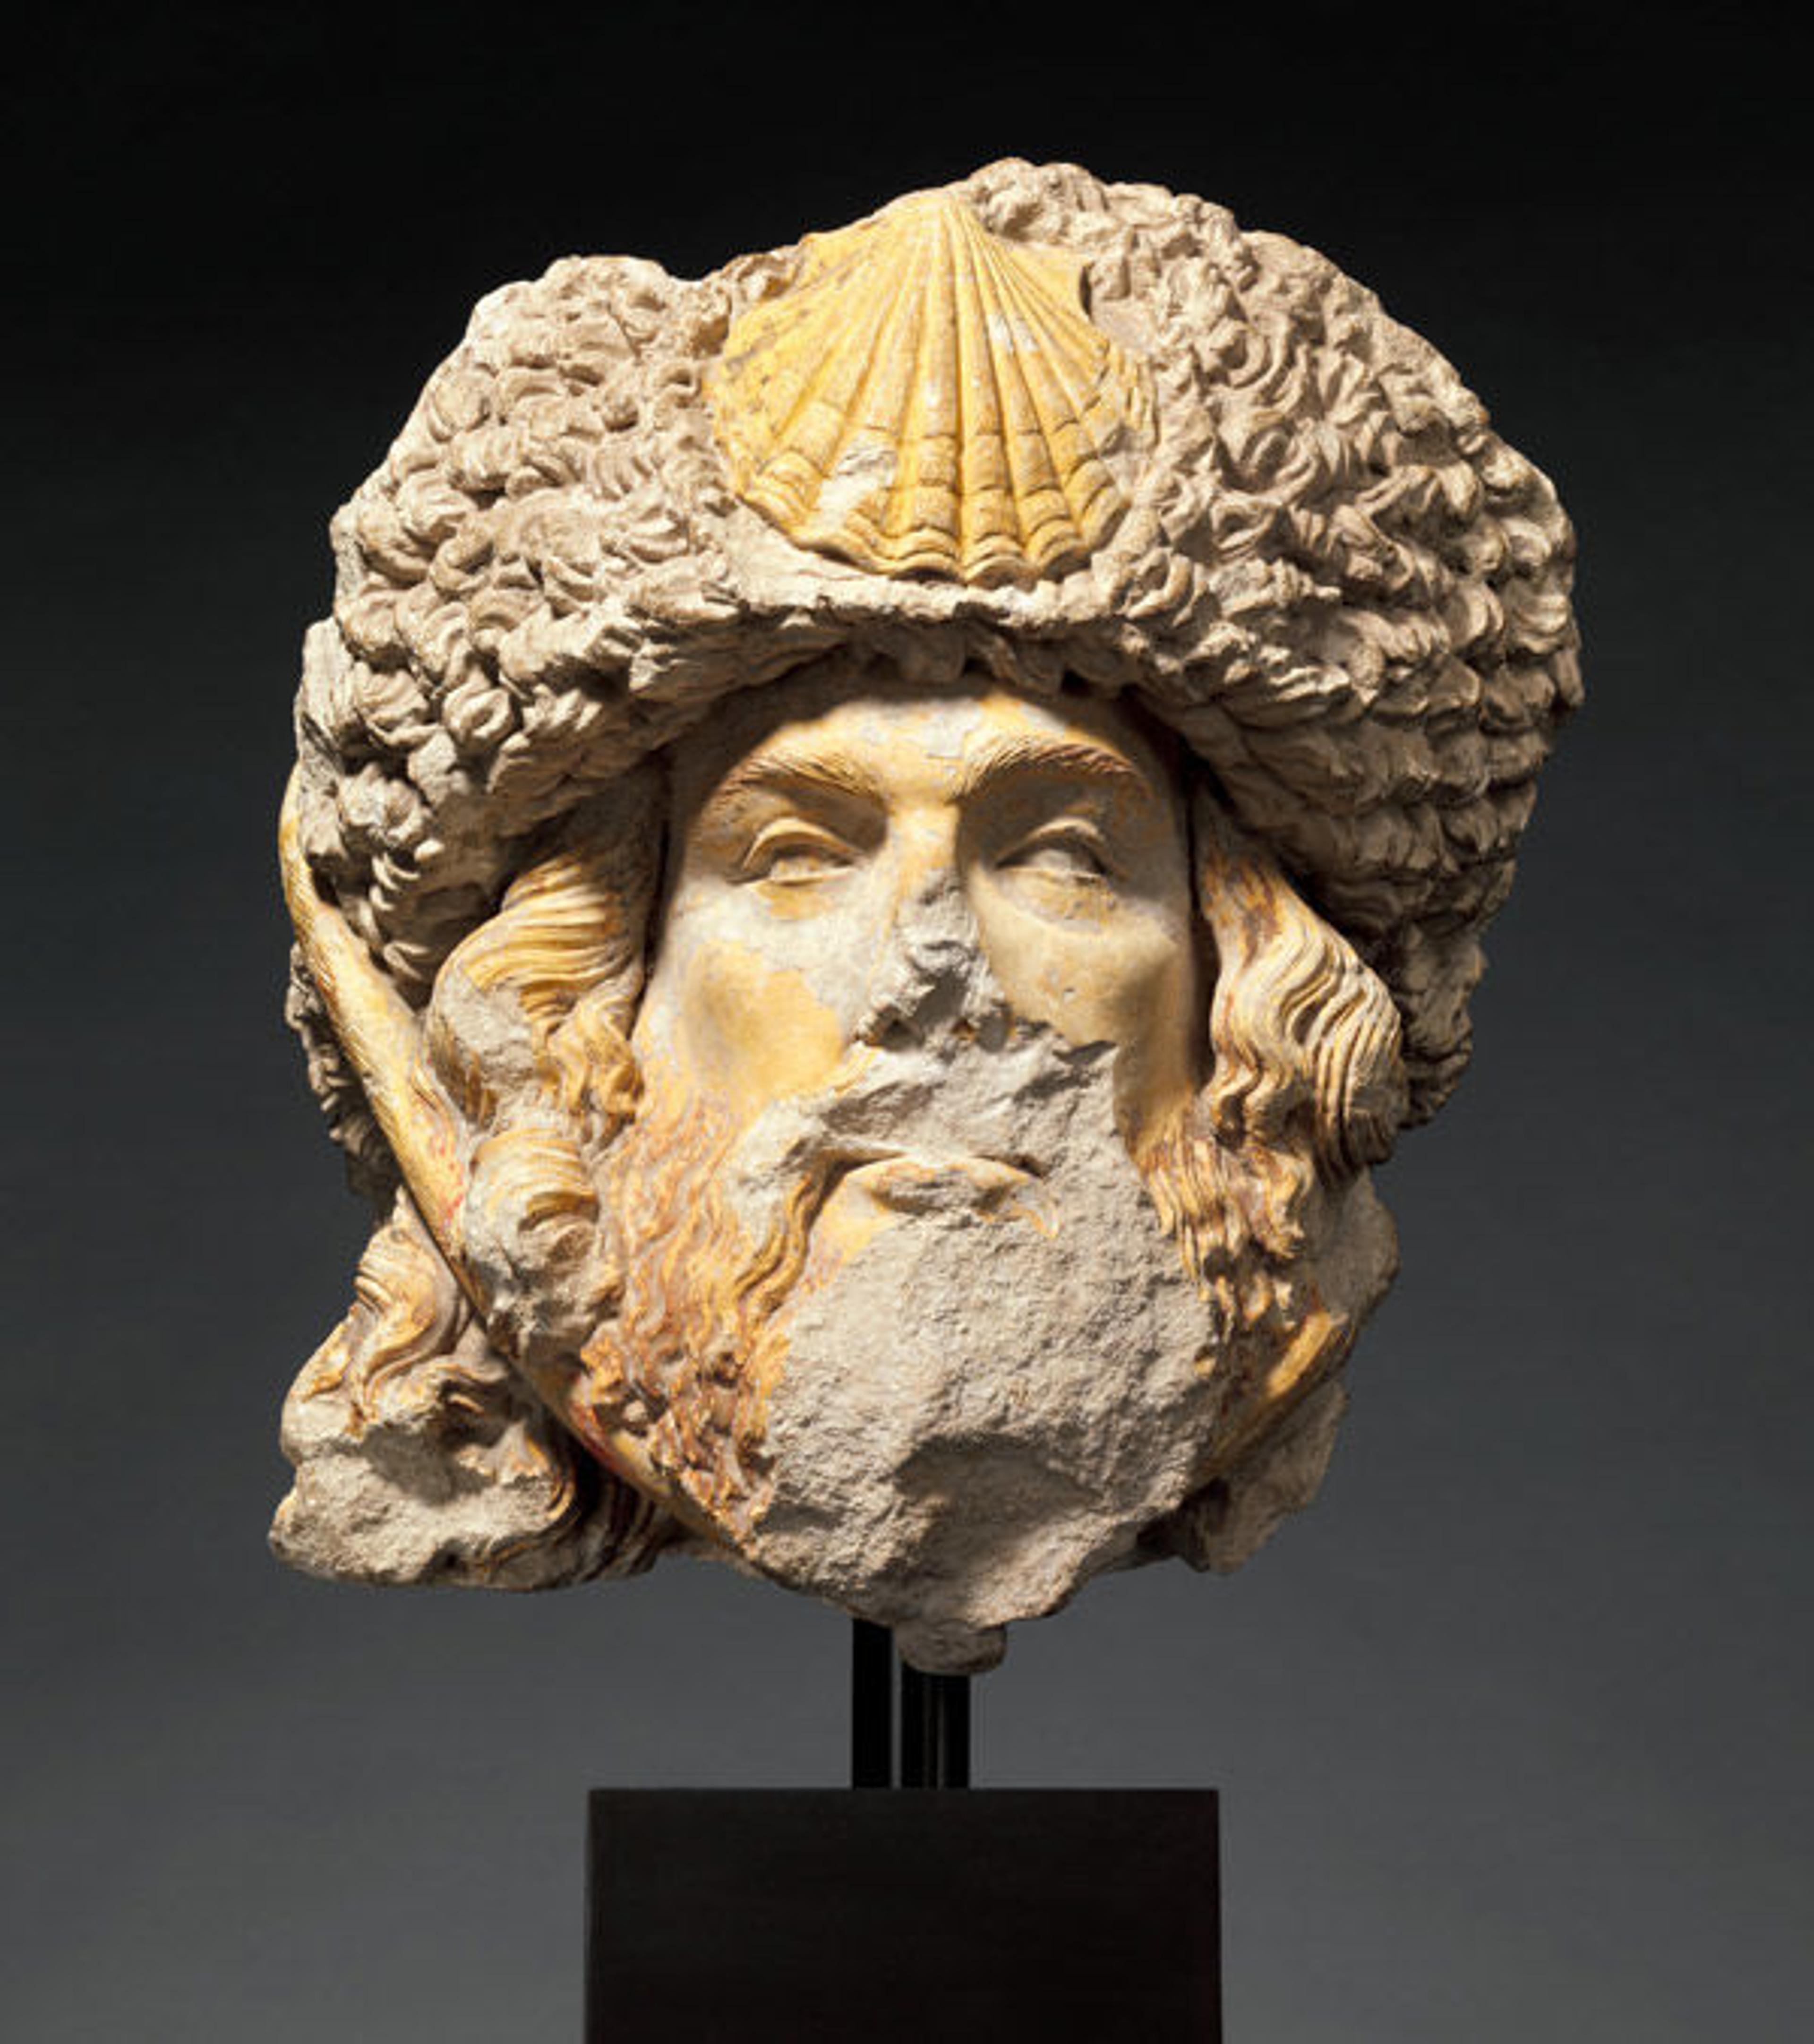 Head of Saint James the Greater with Sheepskin Hat with Scallop Shell, 1450–1500. Made in Burgundy (?), France. French. Limestone with traces of paint; 14 1/8 x 12 1/2 x 9 1/8 in., 44 lb. (35.8 x 31.7 x 23.1 cm, 20 kg). The Metropolitan Museum of Art, New York, Purchase, The Cloisters Collection and Audrey Love Foundation Gift, 2015 (2015.241) 